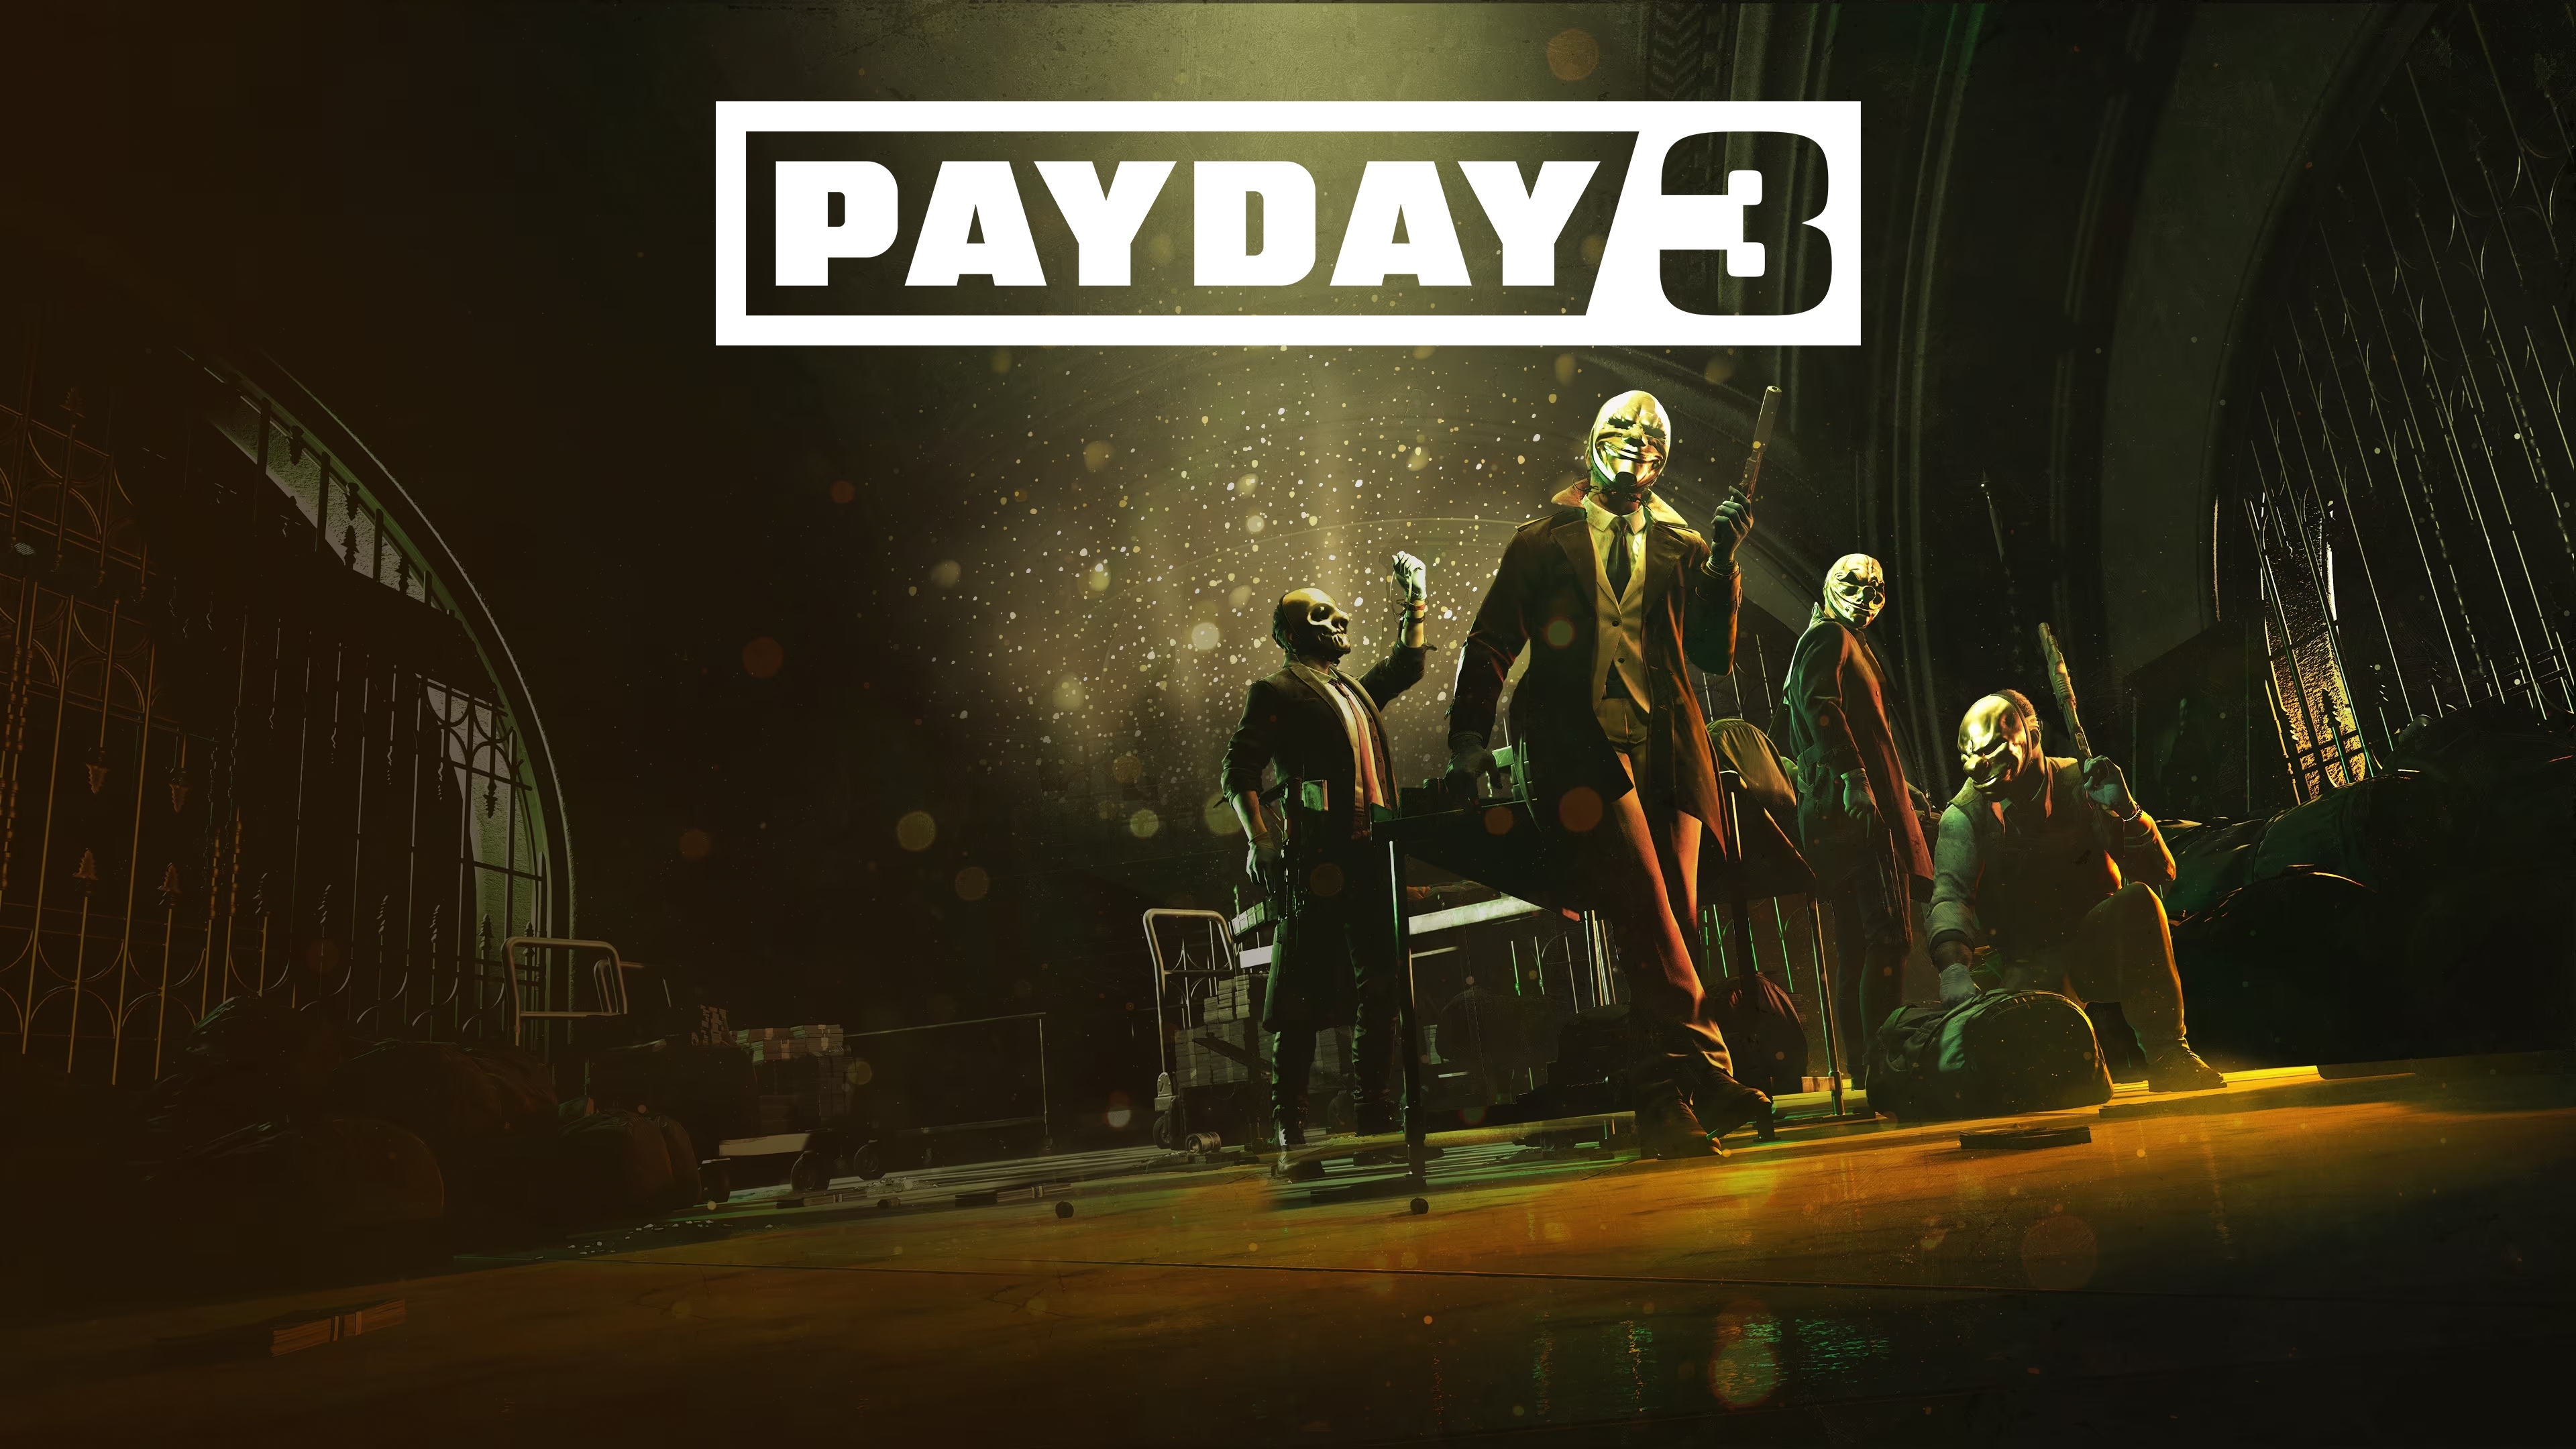 Payday 3 Released Too Soon - Servers and Matchmaking Instability